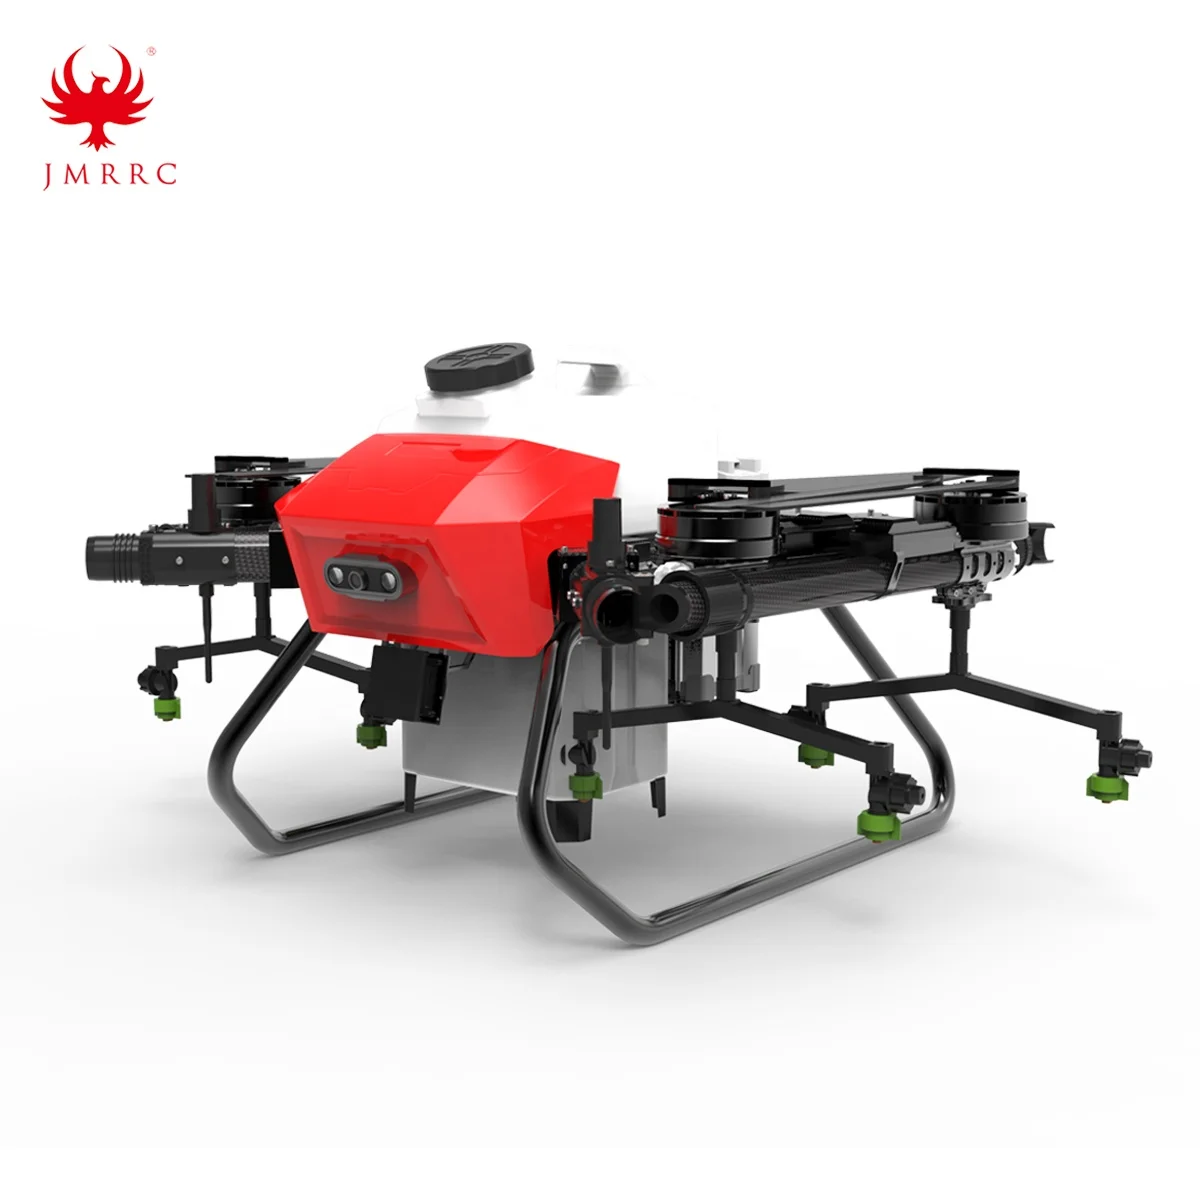 

21KG Payload agriculture drone frame kit 21L Agricultural Drone Sprayer Remote Farm Spraying UAV For Crop Protection Agriculture